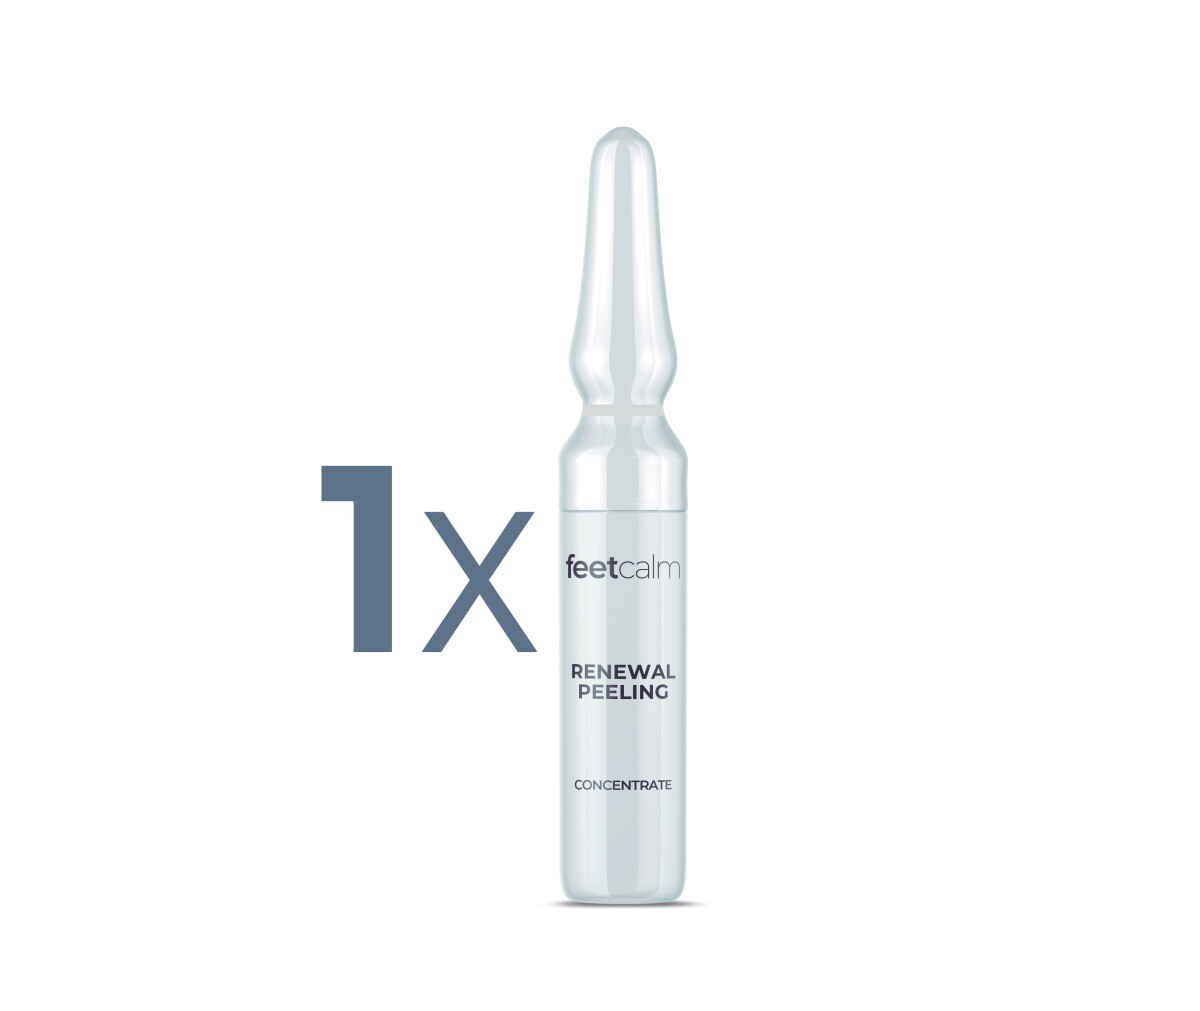 Feetcalm Ampulle Renewal Peeling Concentrate 1 Stck x 2 ml